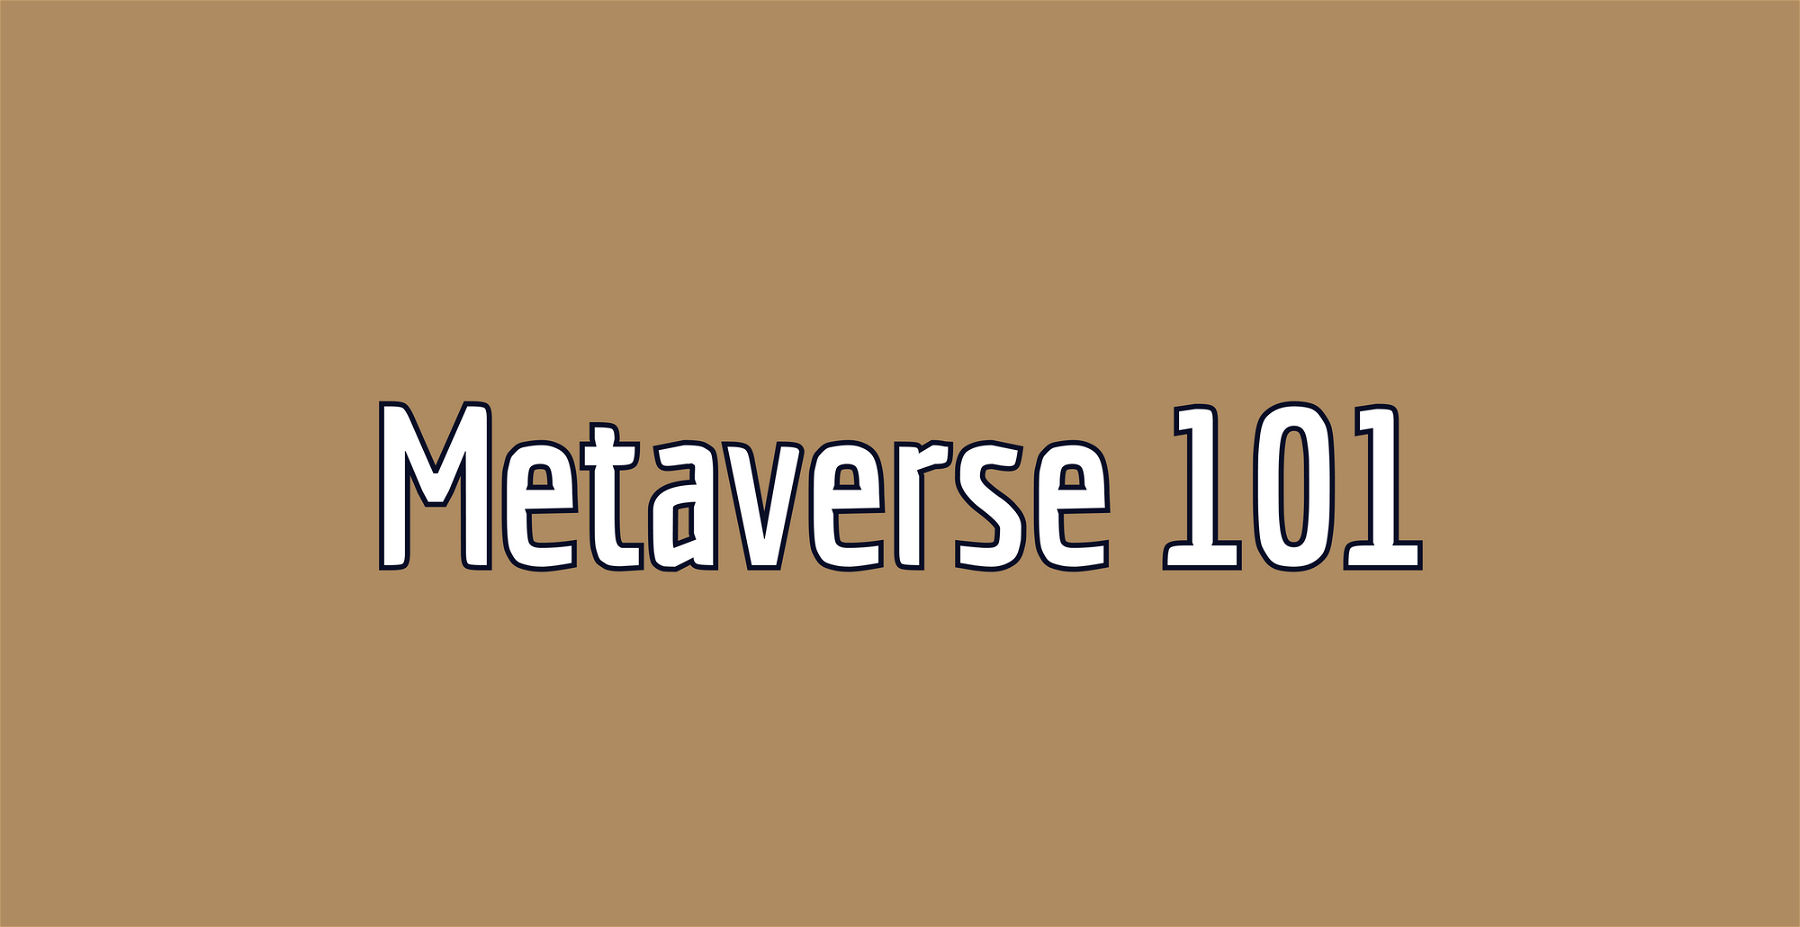 Metaverse 101: A Primer and Early Trends